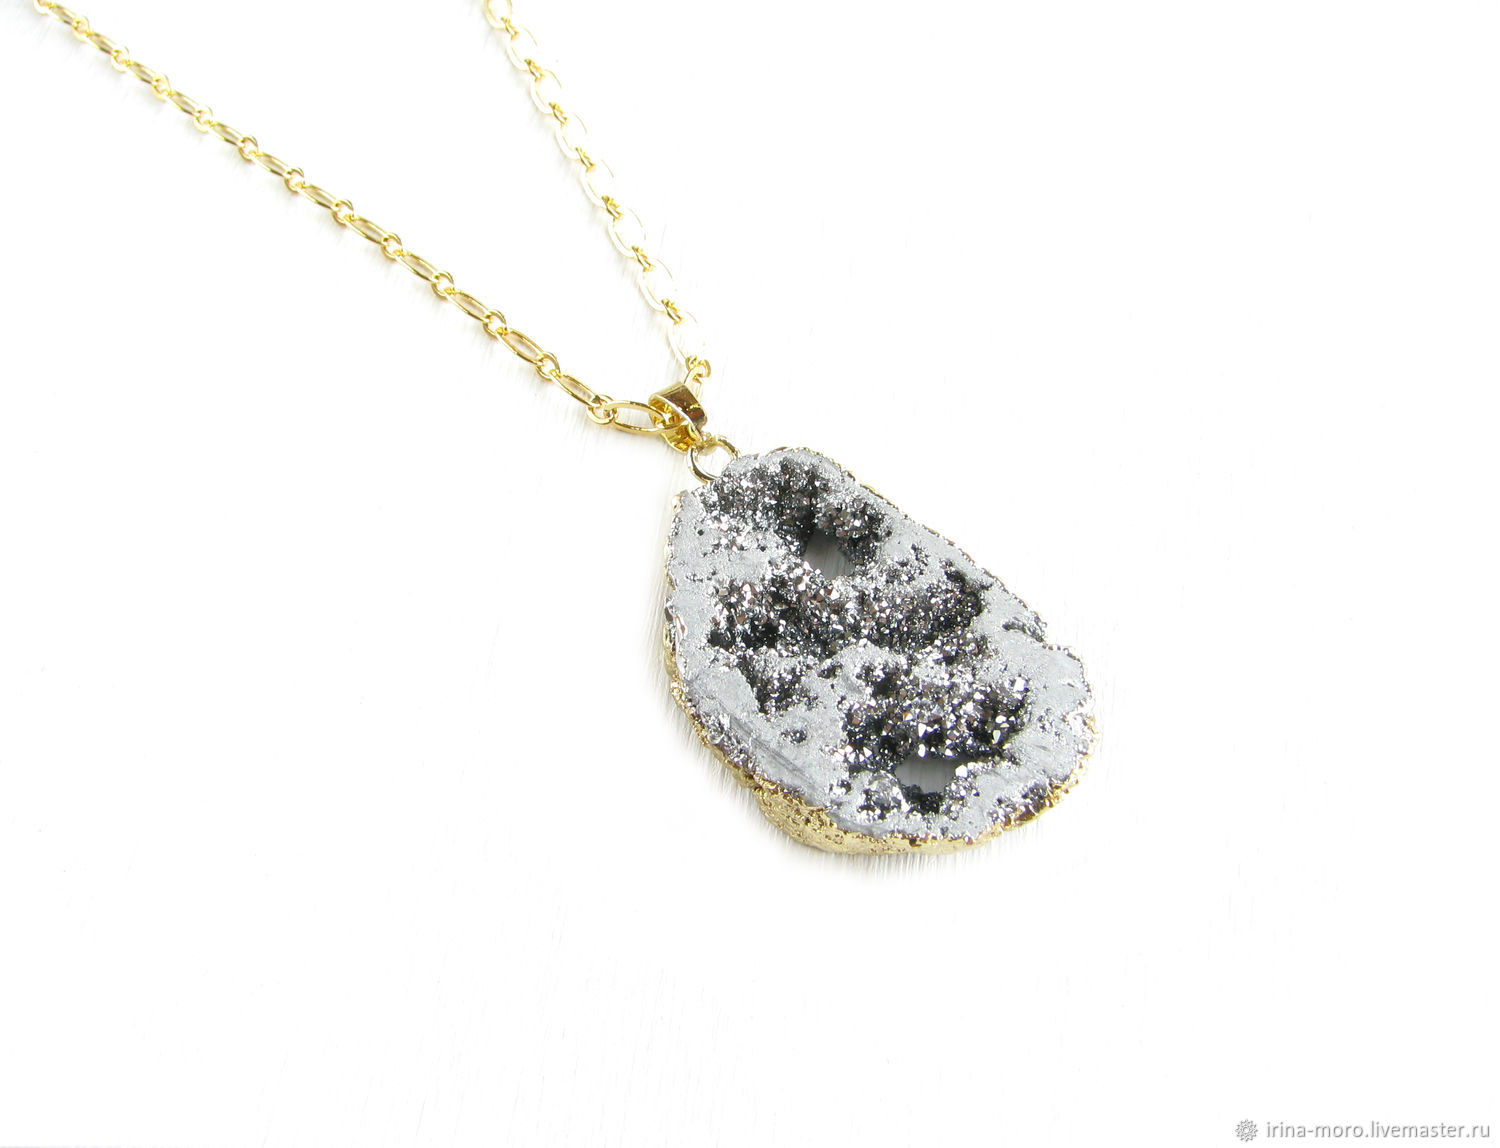 The Druse agate pendant, silver agate, agate pendant with silver ...